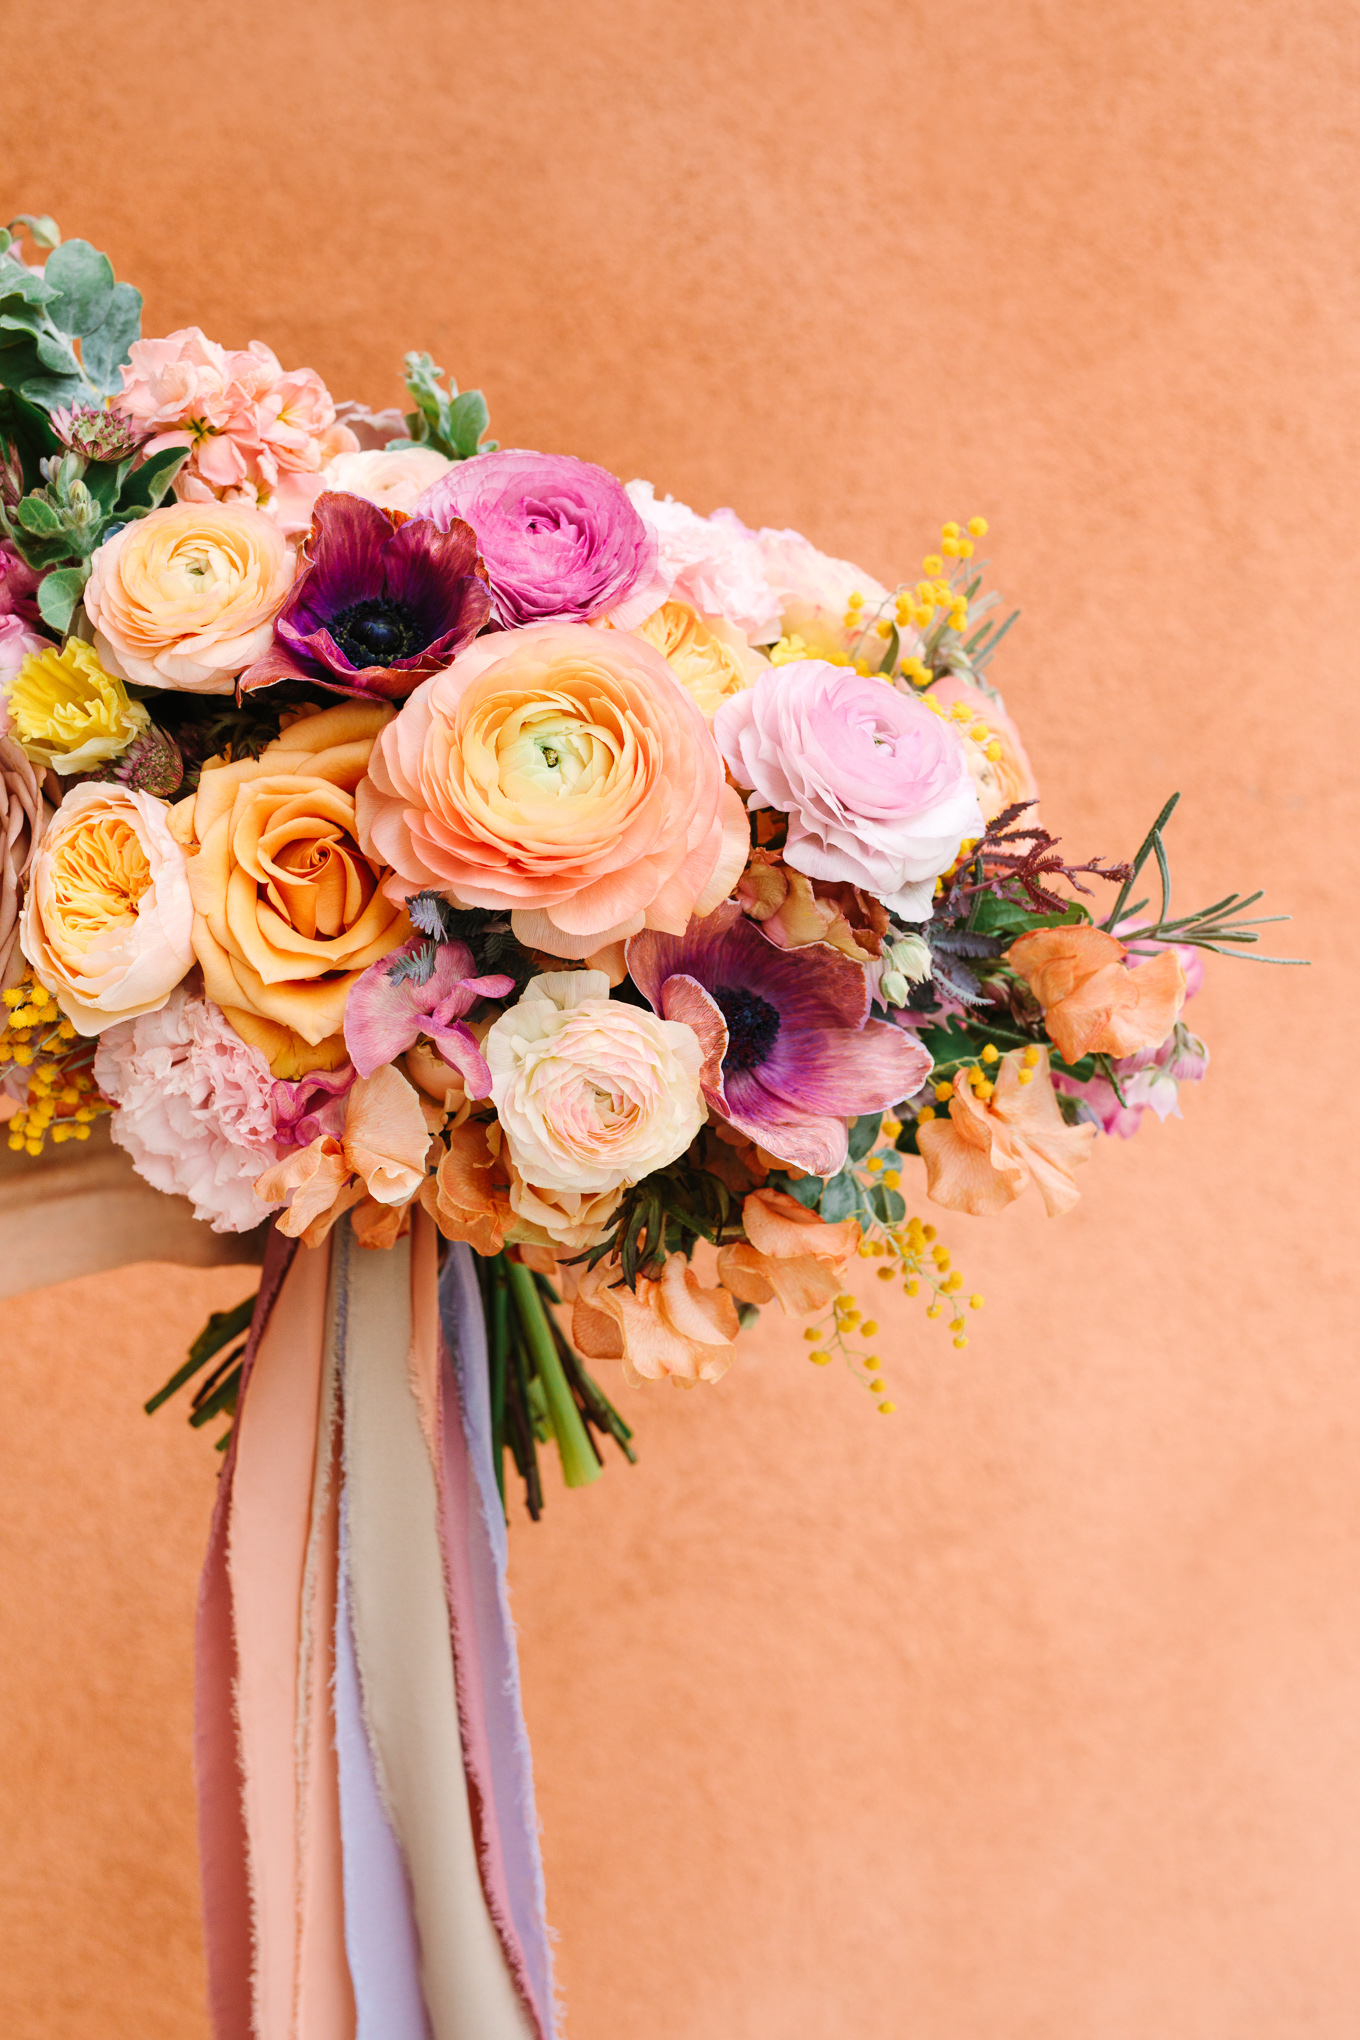 Pastel spring wedding bouquet | Beautiful bridal bouquet inspiration and advice | Colorful and elevated wedding photography for fun-loving couples in Southern California | #weddingflowers #weddingbouquet #bridebouquet #bouquetideas #uniquebouquet   Source: Mary Costa Photography | Los Angeles